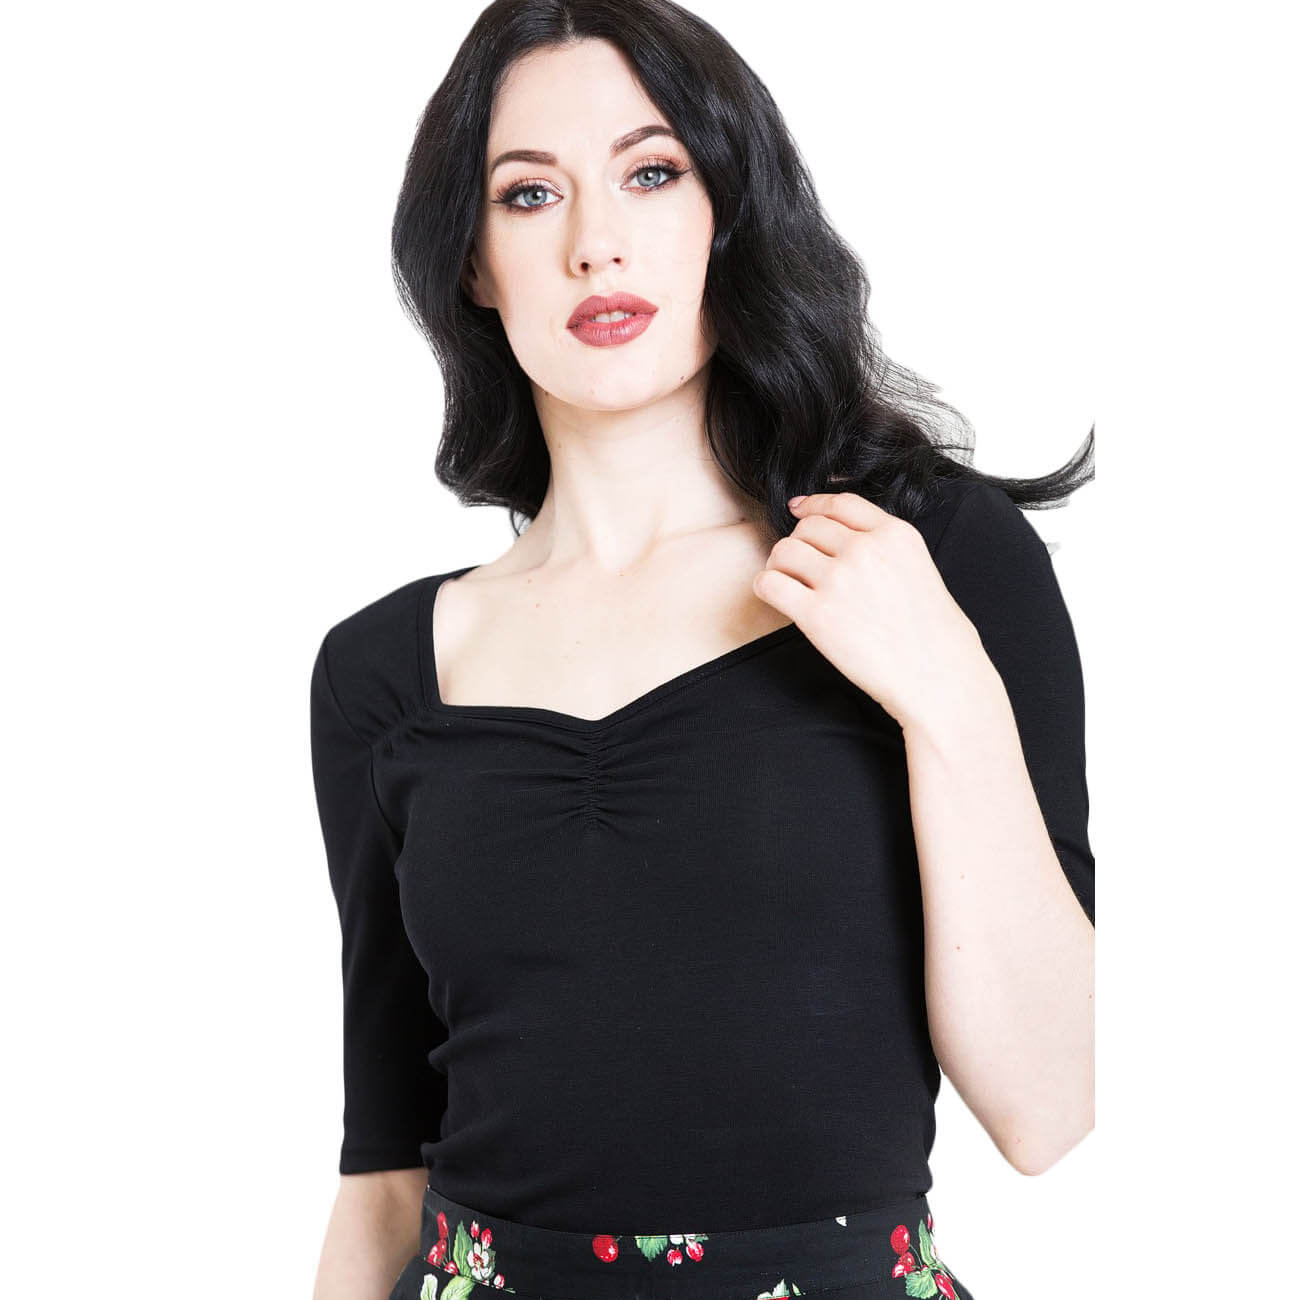 A model with black hair looking straight ahead is wearing hell Bunny black retro style philippa blouse